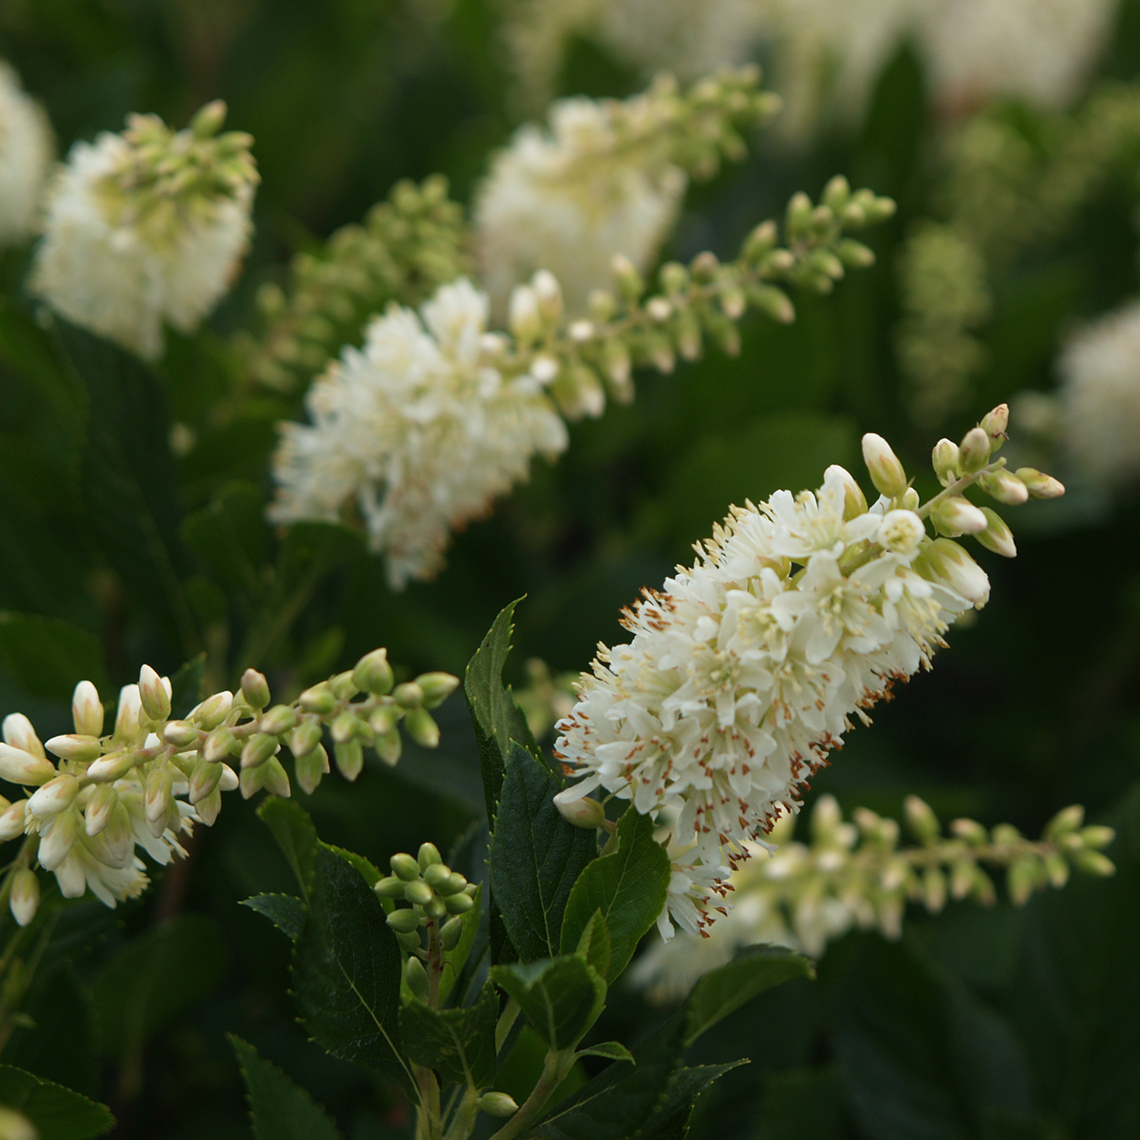 Close up of spiky white Sugartina Crystalina Clethra flowers